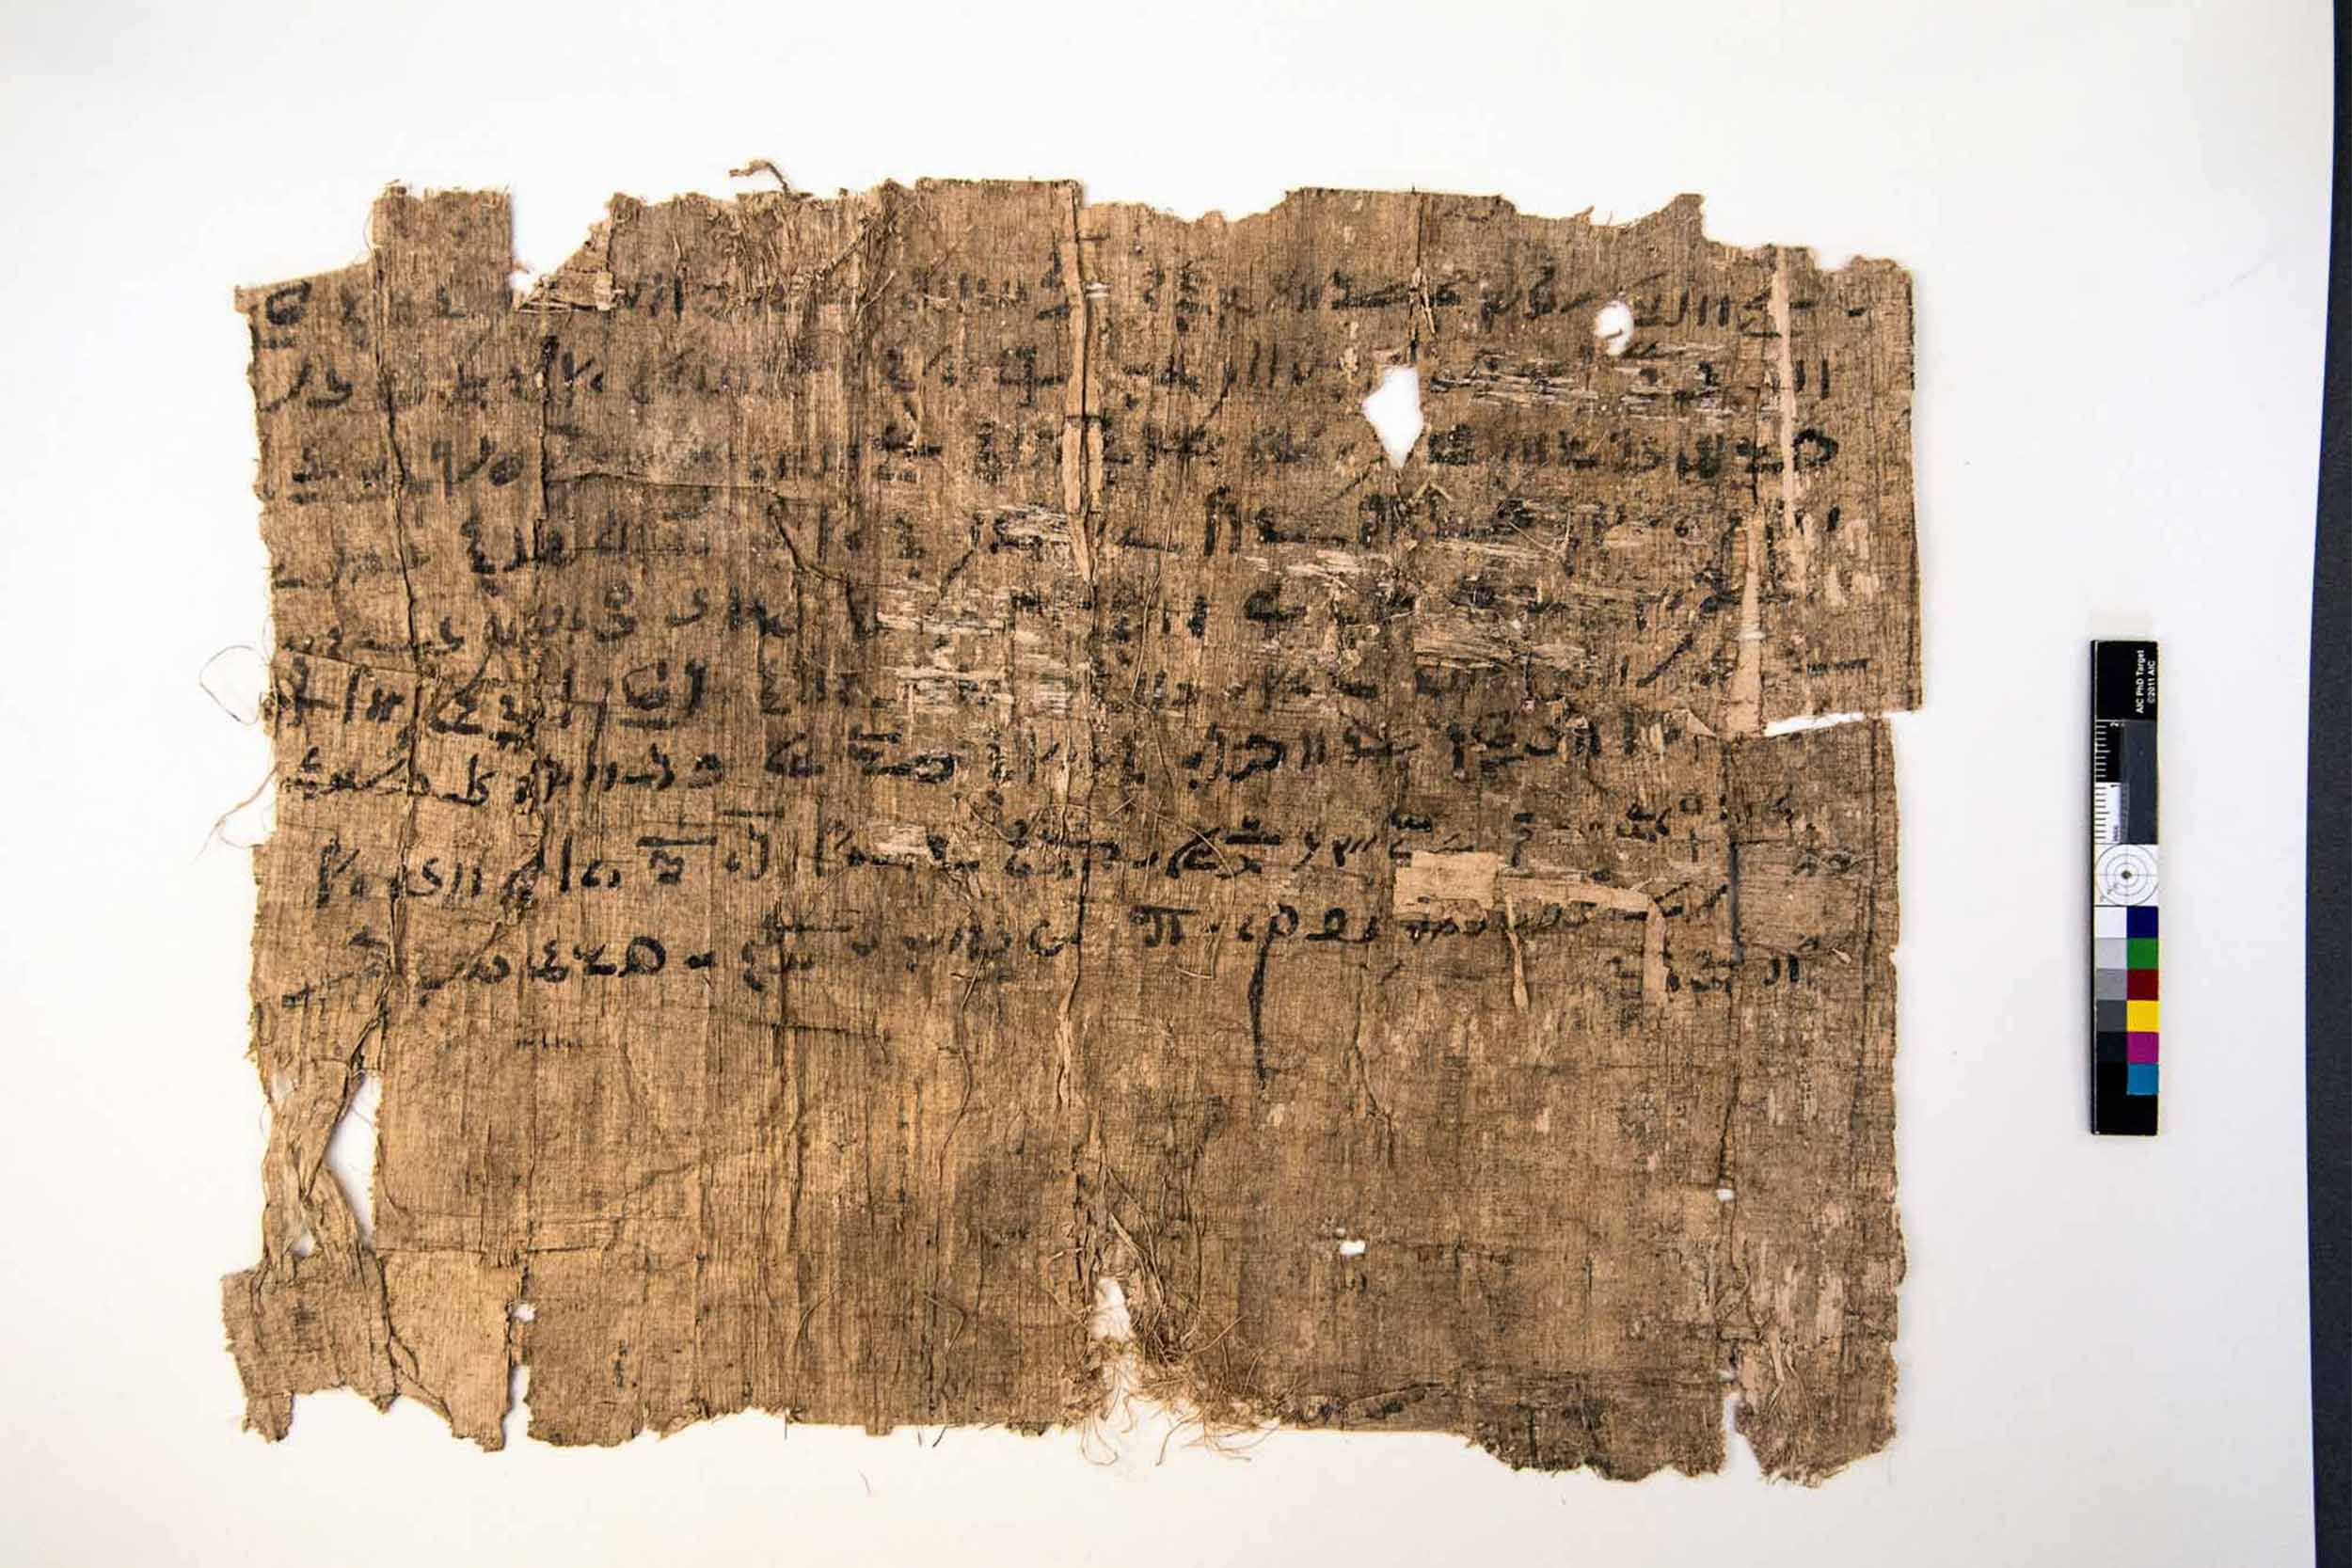 Egyptian papyrus with writing on it